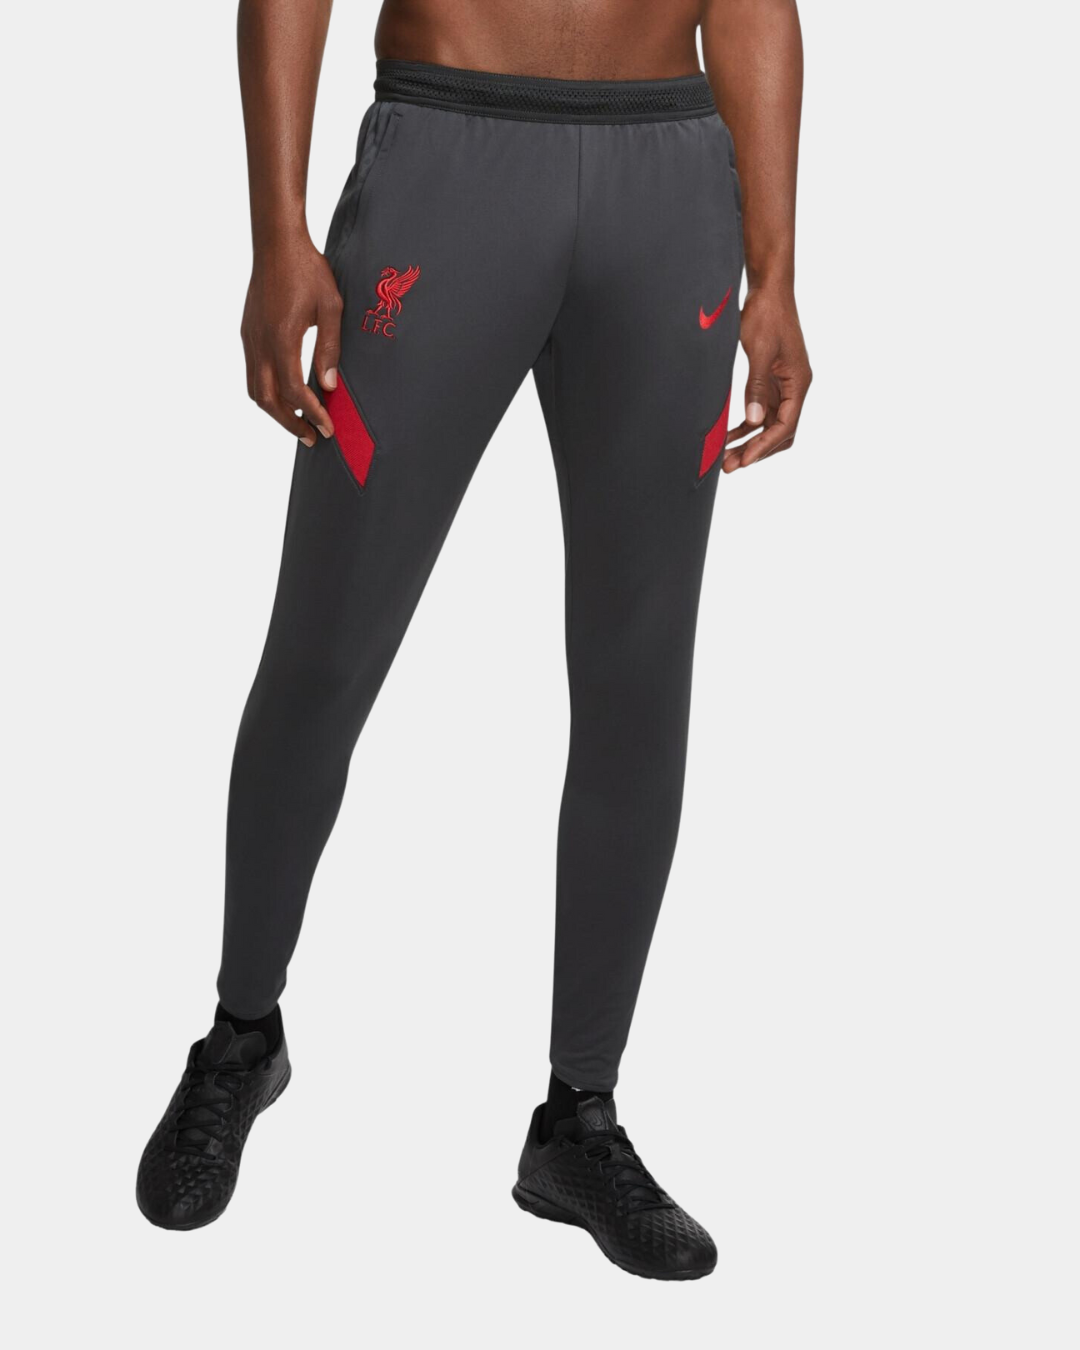 Liverpool training pants 2020/2021 - Grey/Red